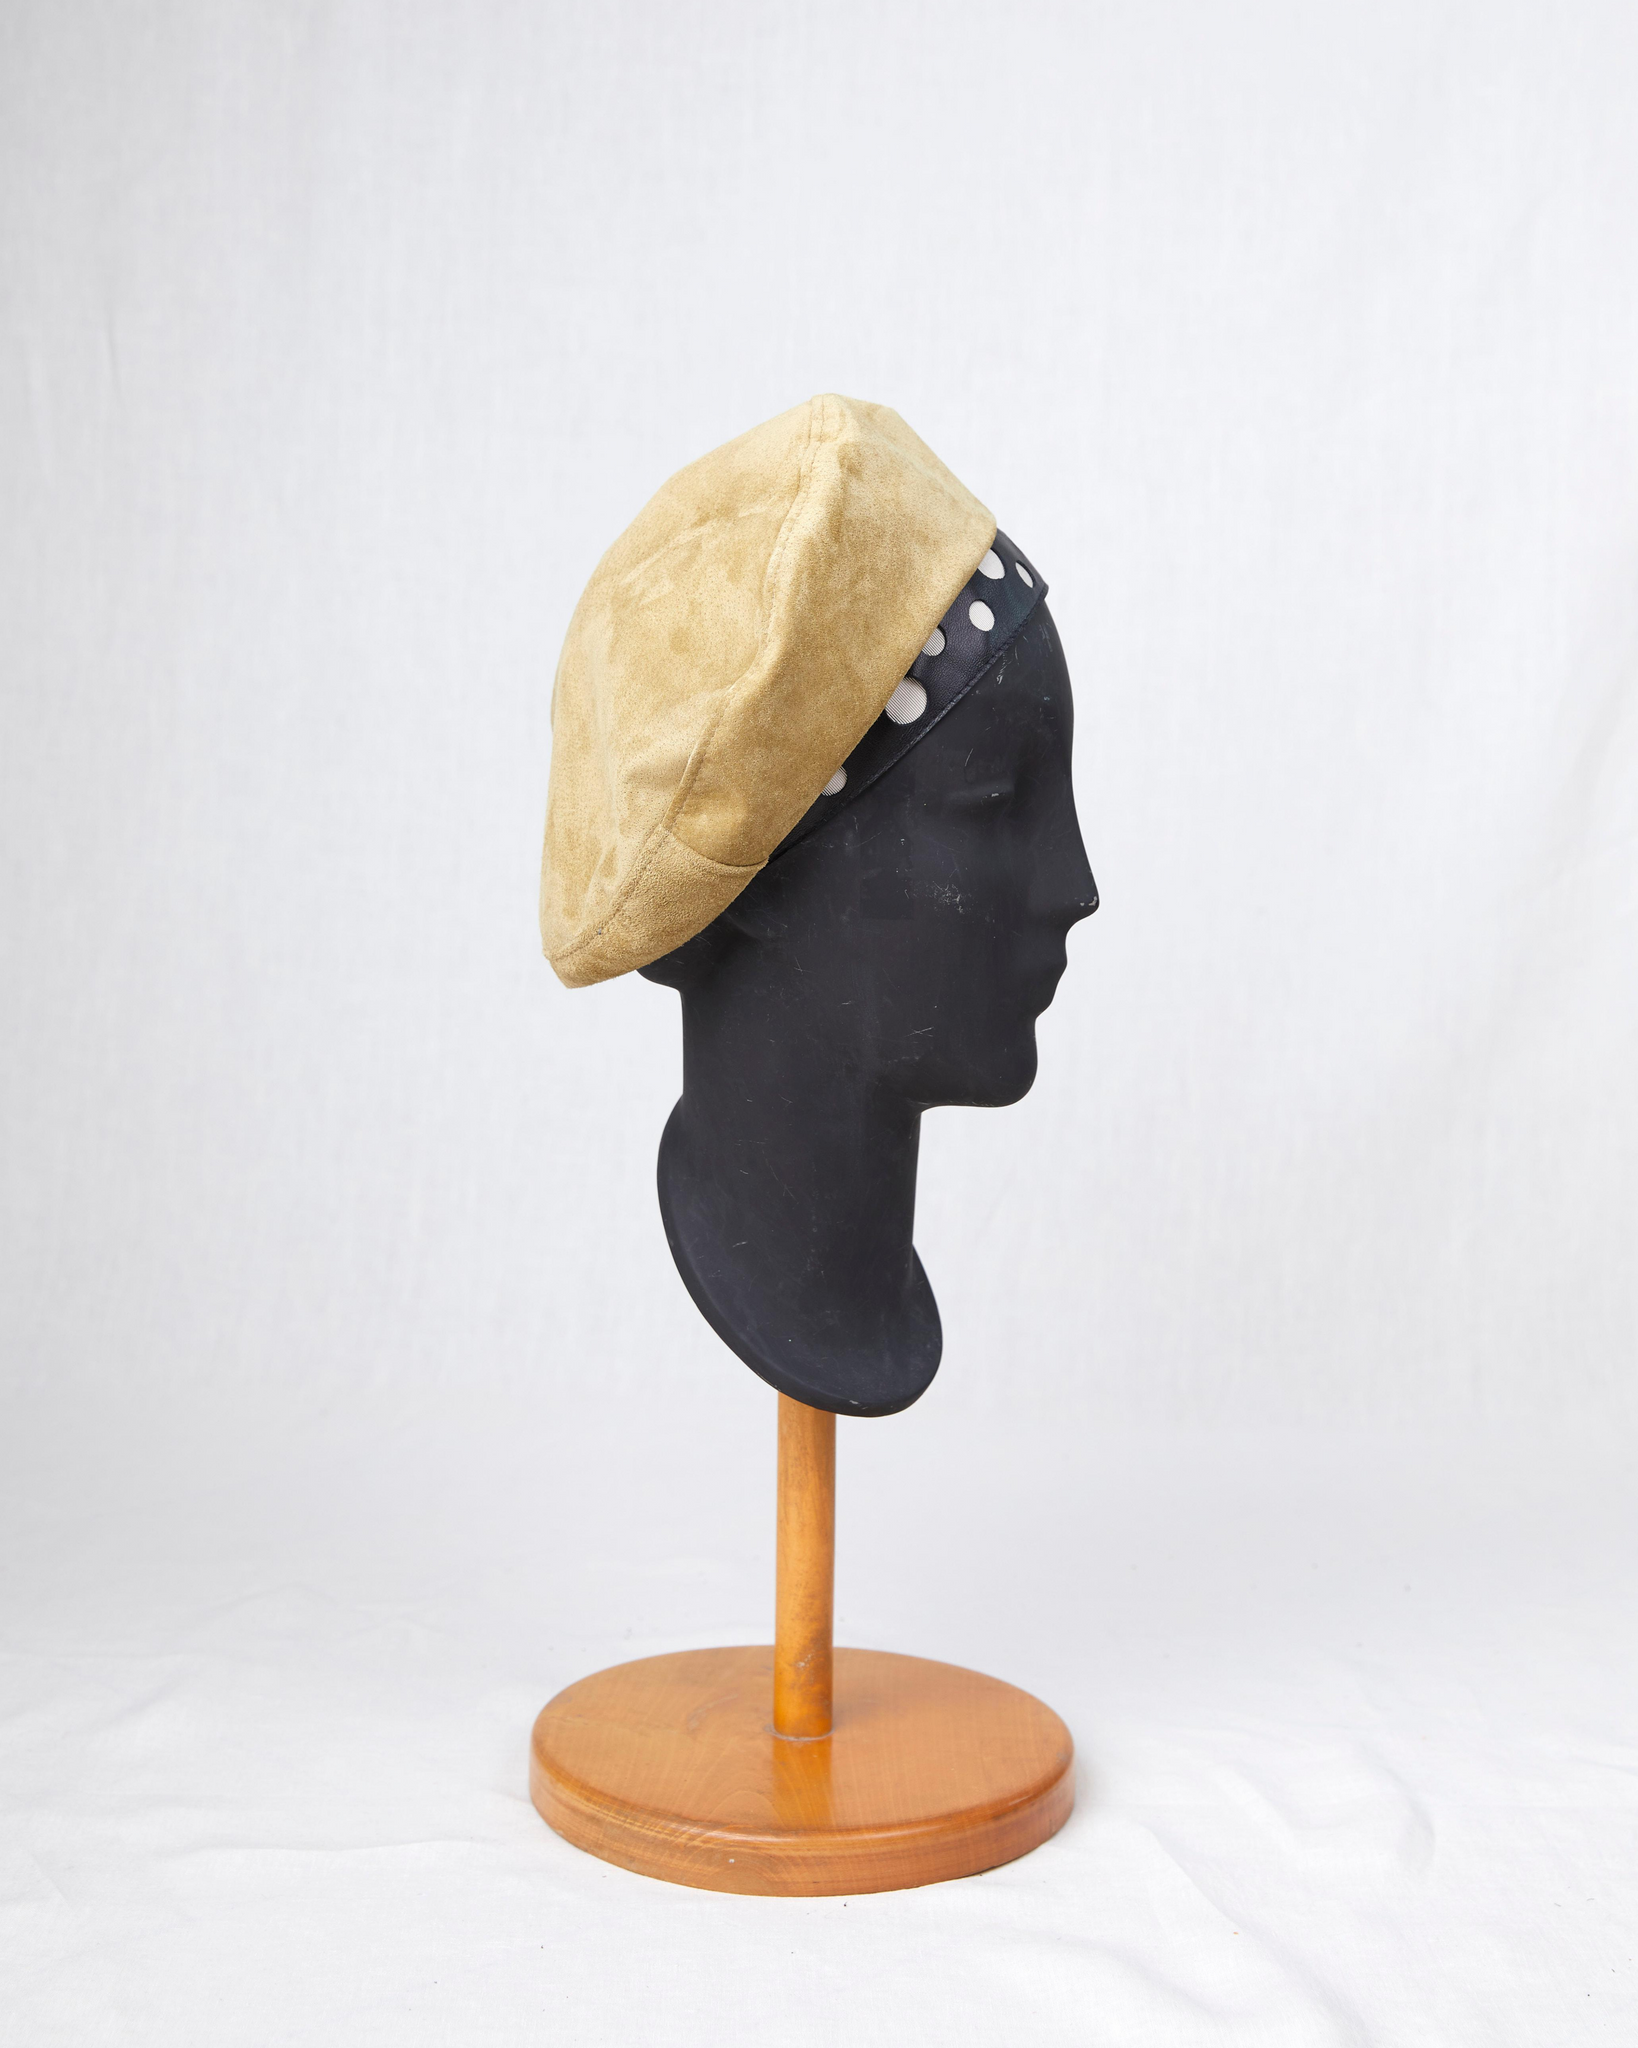 HEADQUARTER | couture headwear Leather beret, made of nappa leather. Designed and handcrafted in Switzerland.